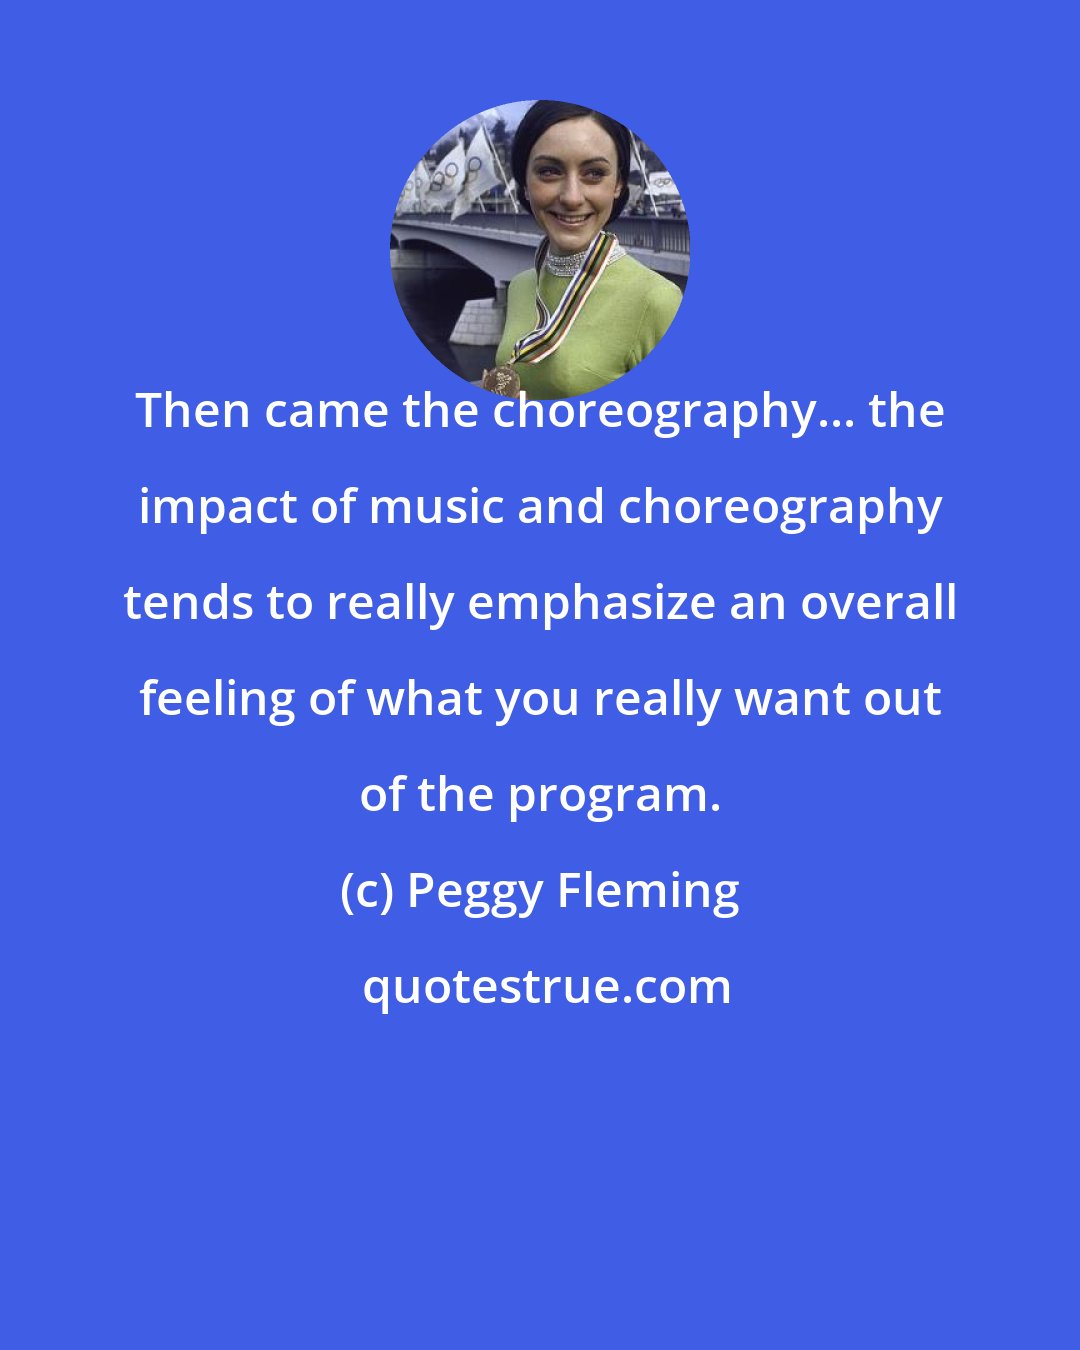 Peggy Fleming: Then came the choreography... the impact of music and choreography tends to really emphasize an overall feeling of what you really want out of the program.